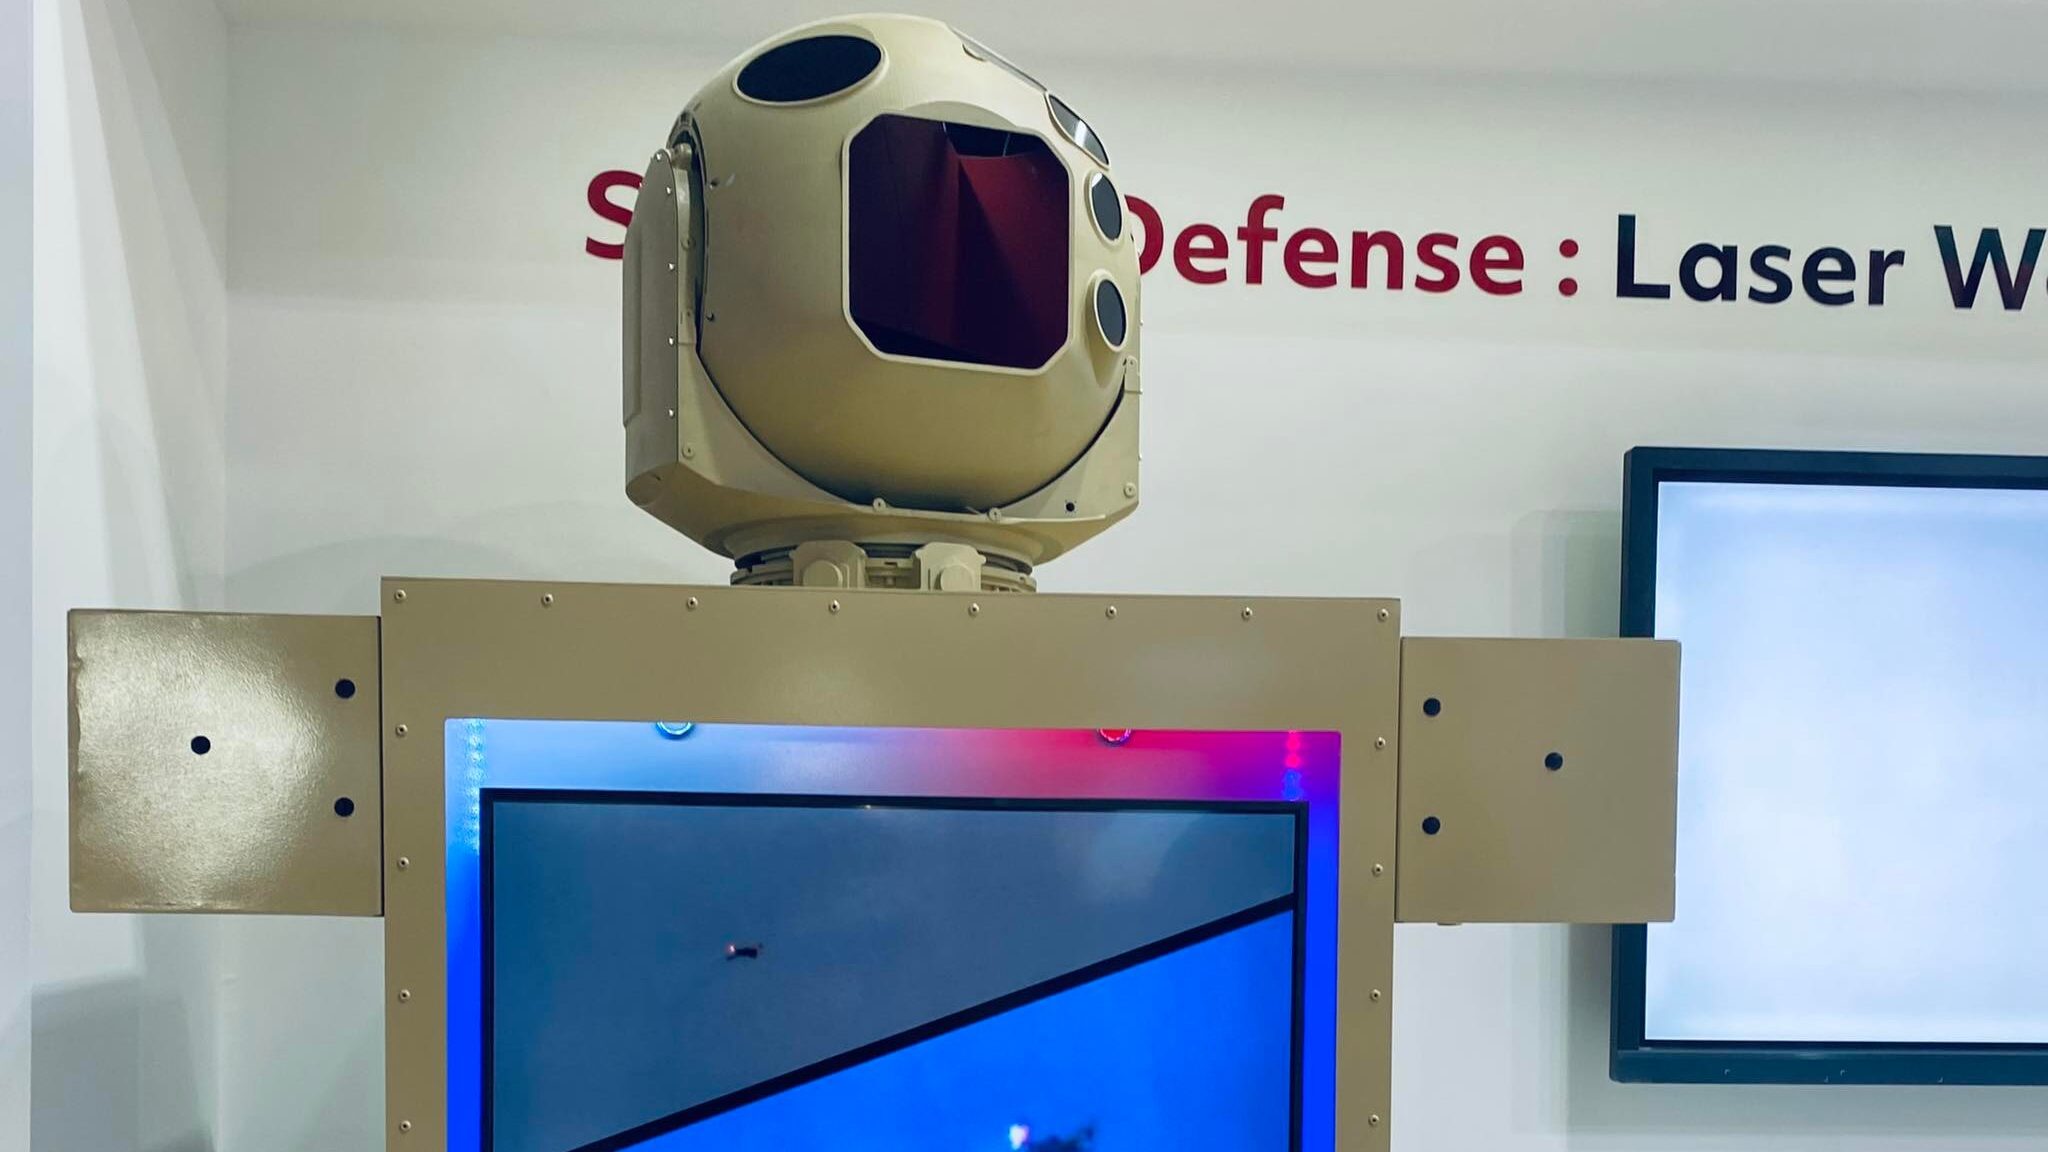 HEL in Abu Dhabi: US defense giants Lockheed, Raytheon push laser tech at Middle East arms show - Breaking Defense